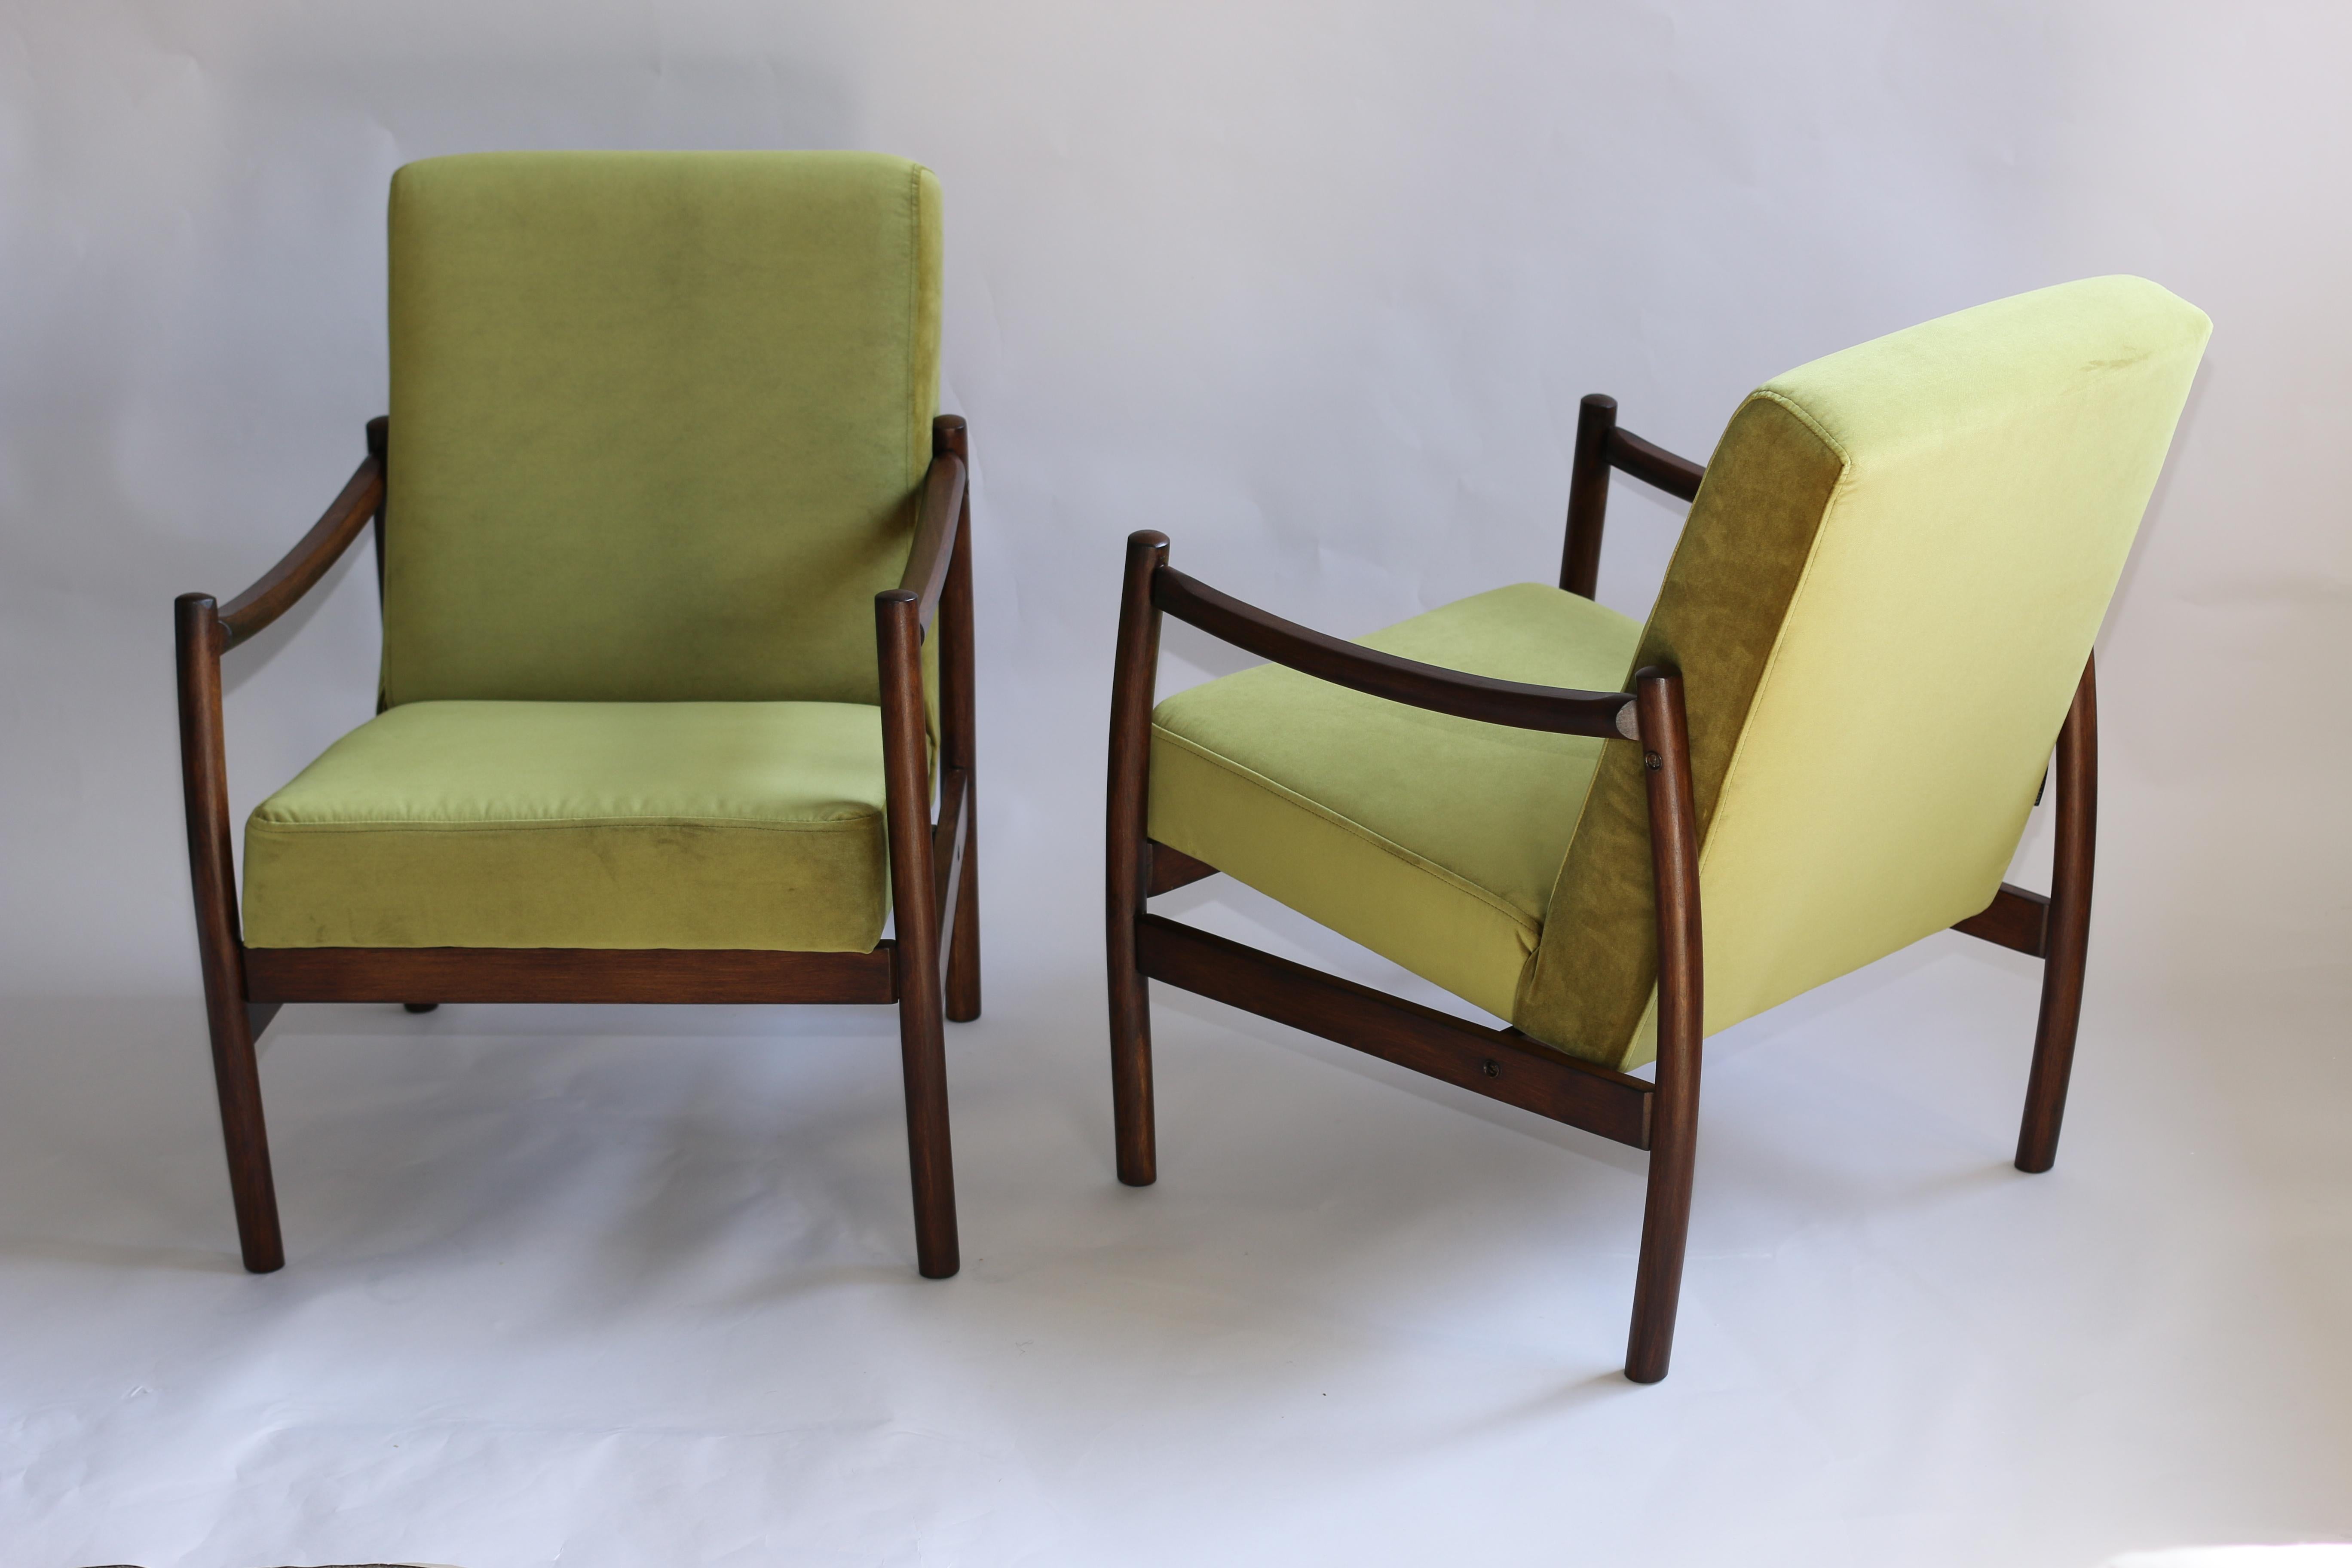 Polish Vintage Armchairs in Green Velvet from 1970s For Sale 1